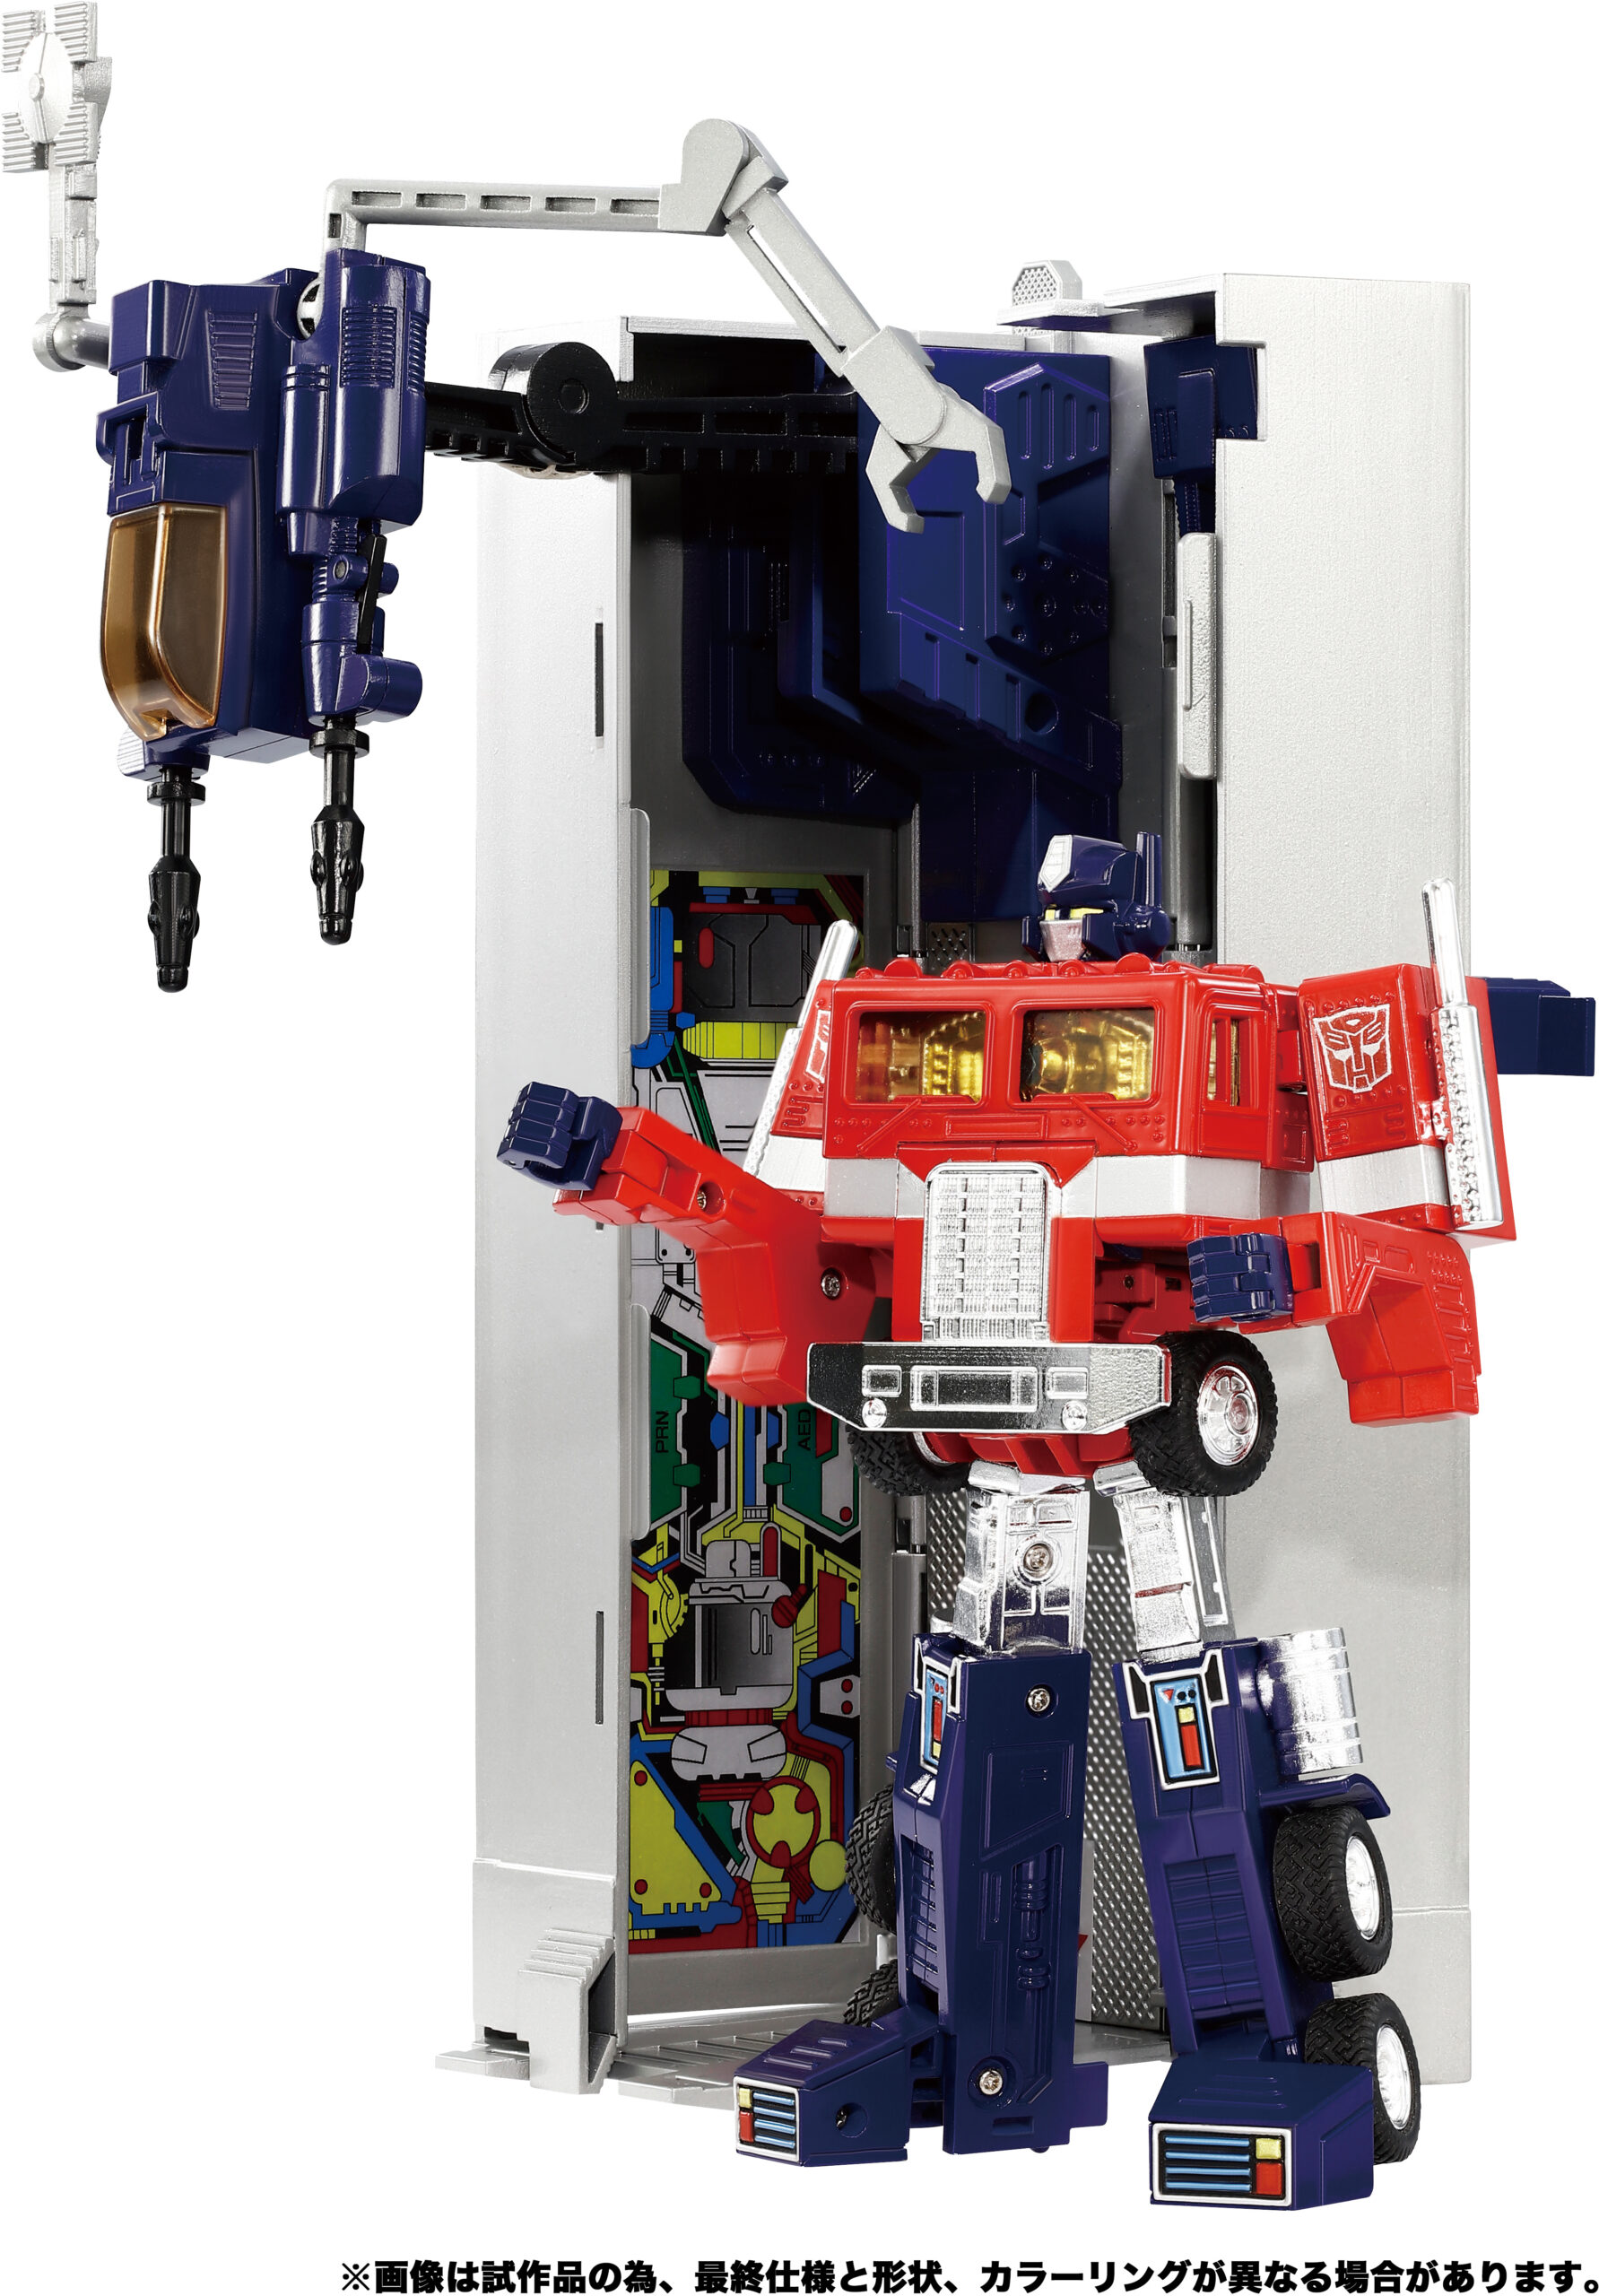 Transformers Missing Link C 01 Convoy 5